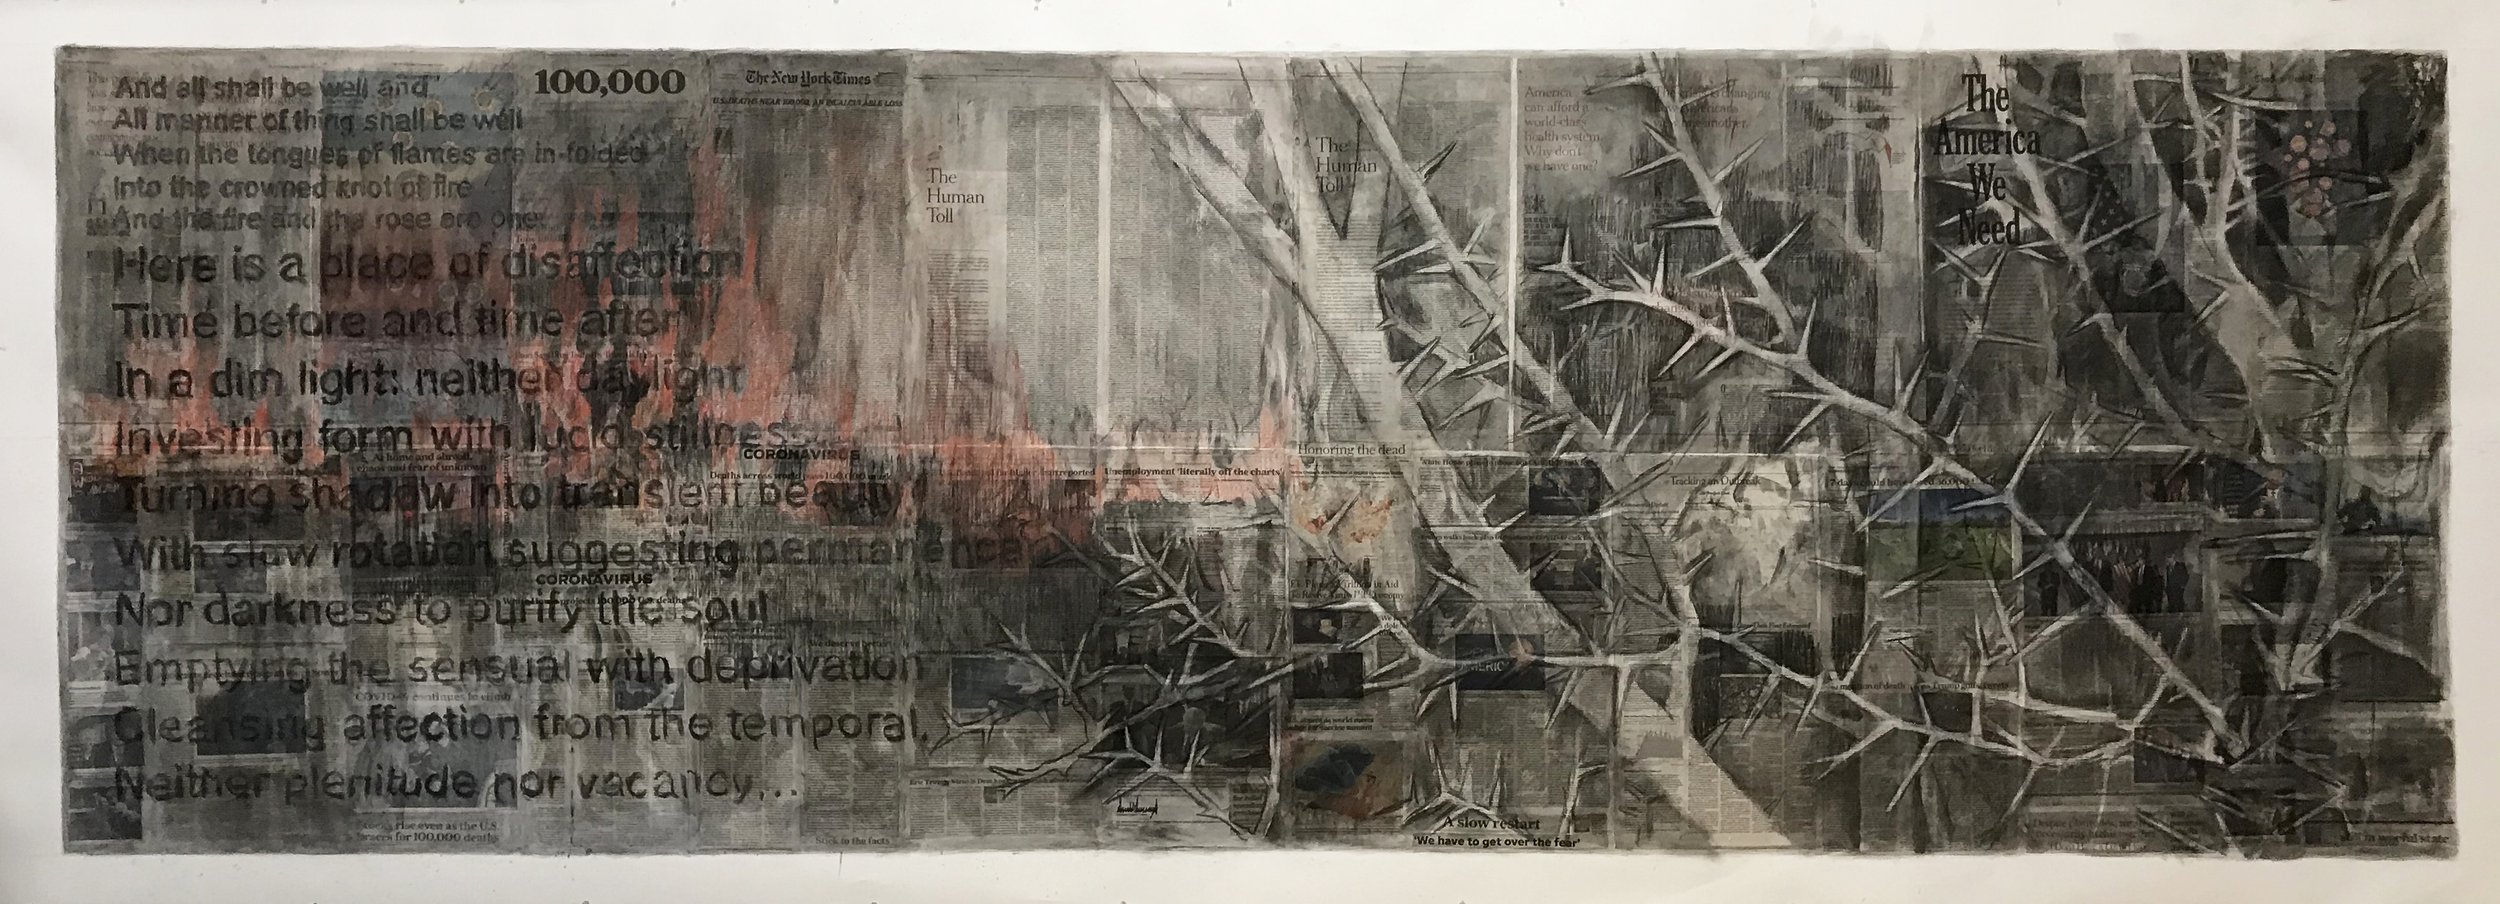 2Ae(0) - Pandemic Lamentations, Part 2 - 53 x 140 in, charcoal, paste, collaged paper 2020.jpg